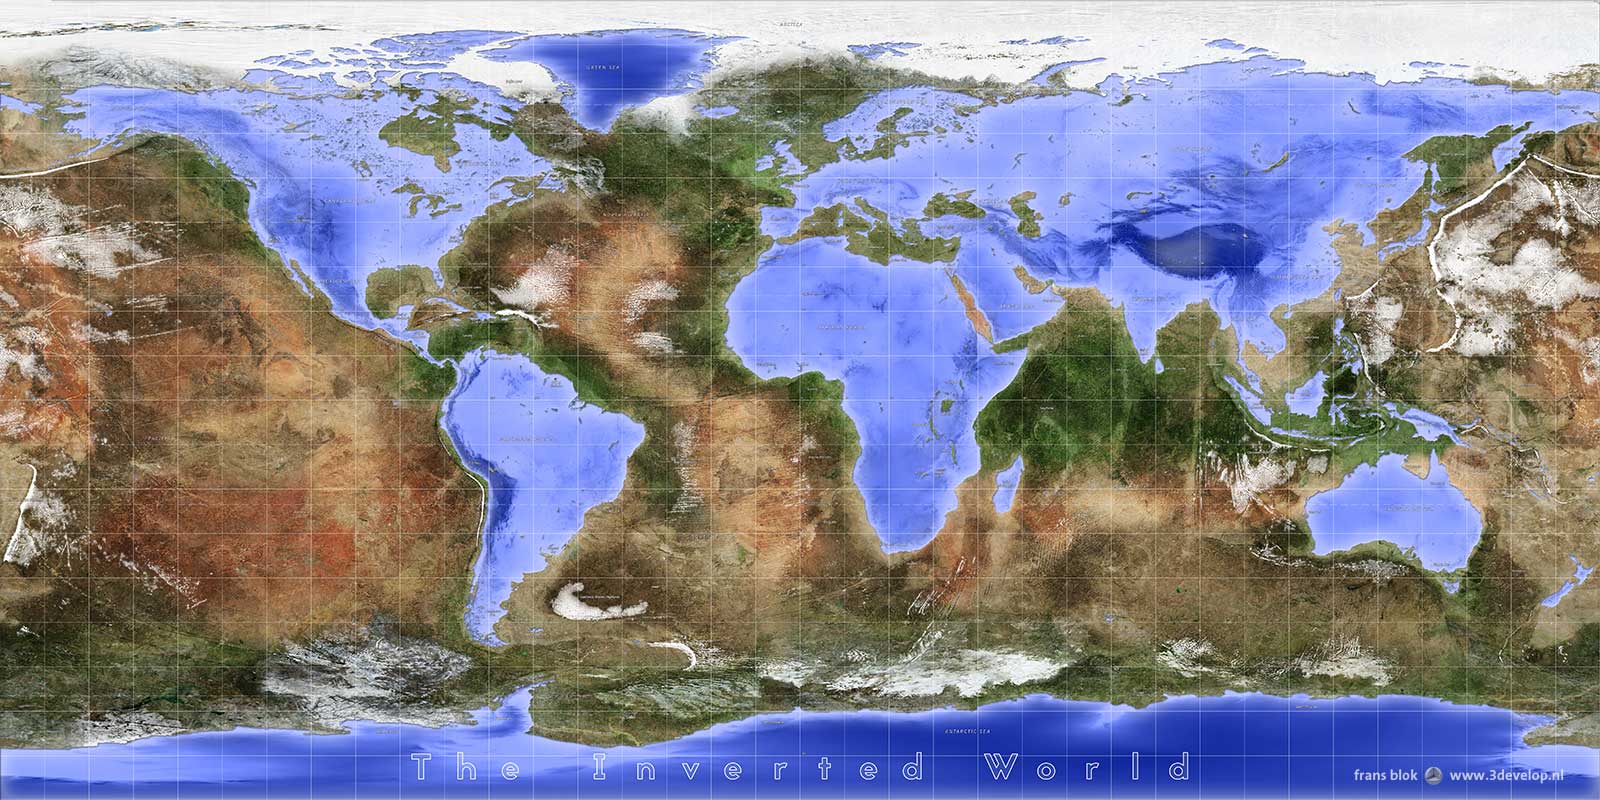 An inverted world map with actually realistic climate